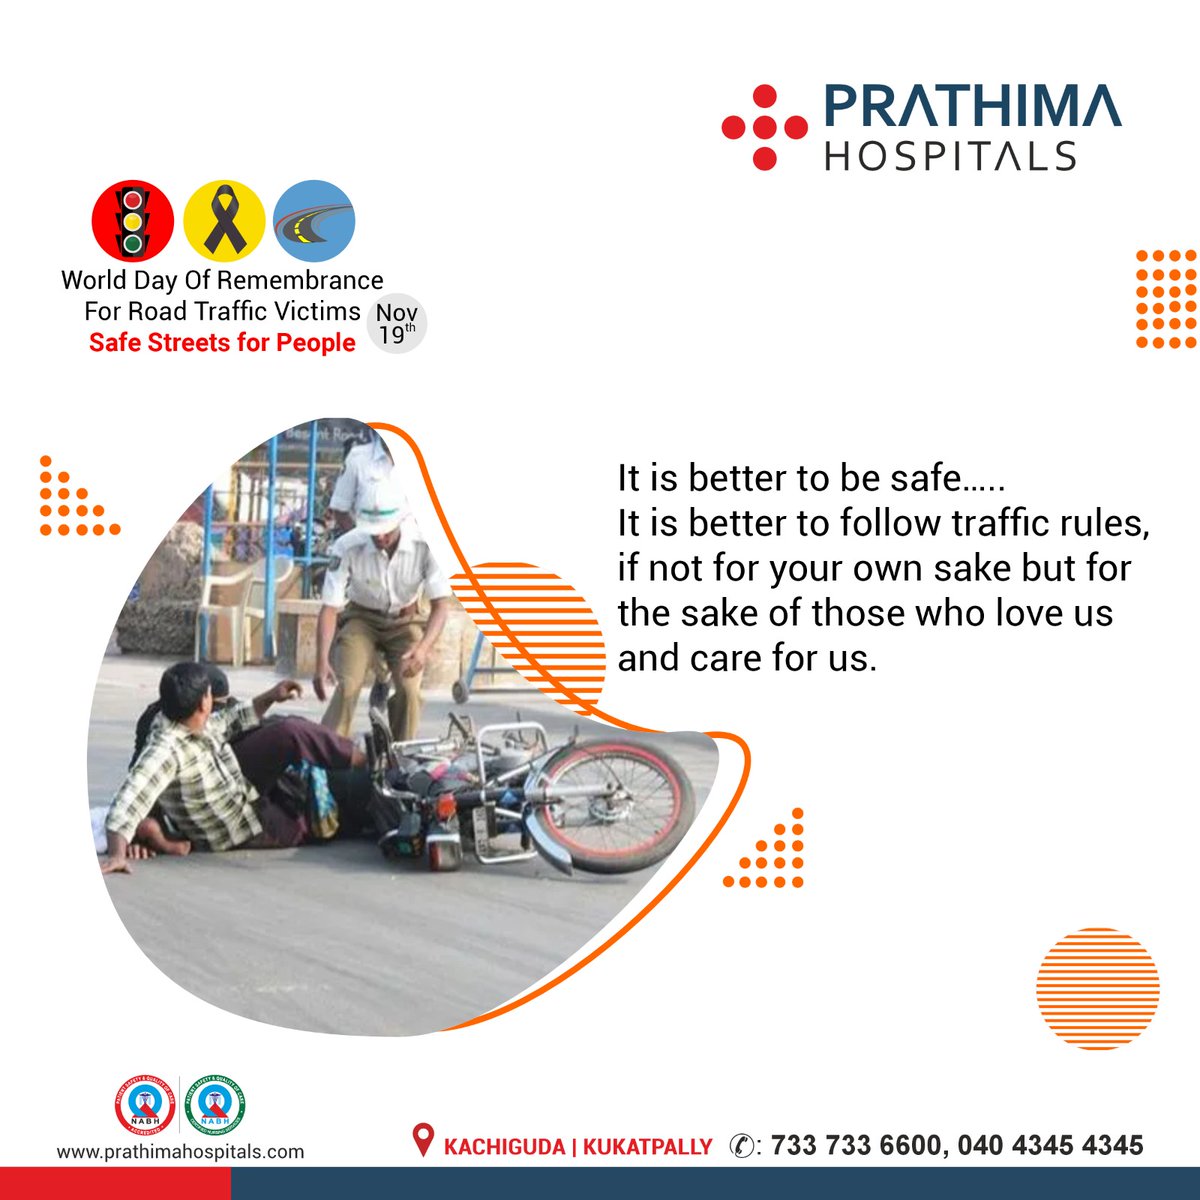 It is better to be safe..... 
It is better to follow traffic rules, if not for your own sake but for the sake of those who love us and care for us.

#RoadSafetyRemembrance #RememberingRoadVictims #RoadSafetyAwareness #RoadSafetyMatters #DriveSafe #prathimahospitals #ph